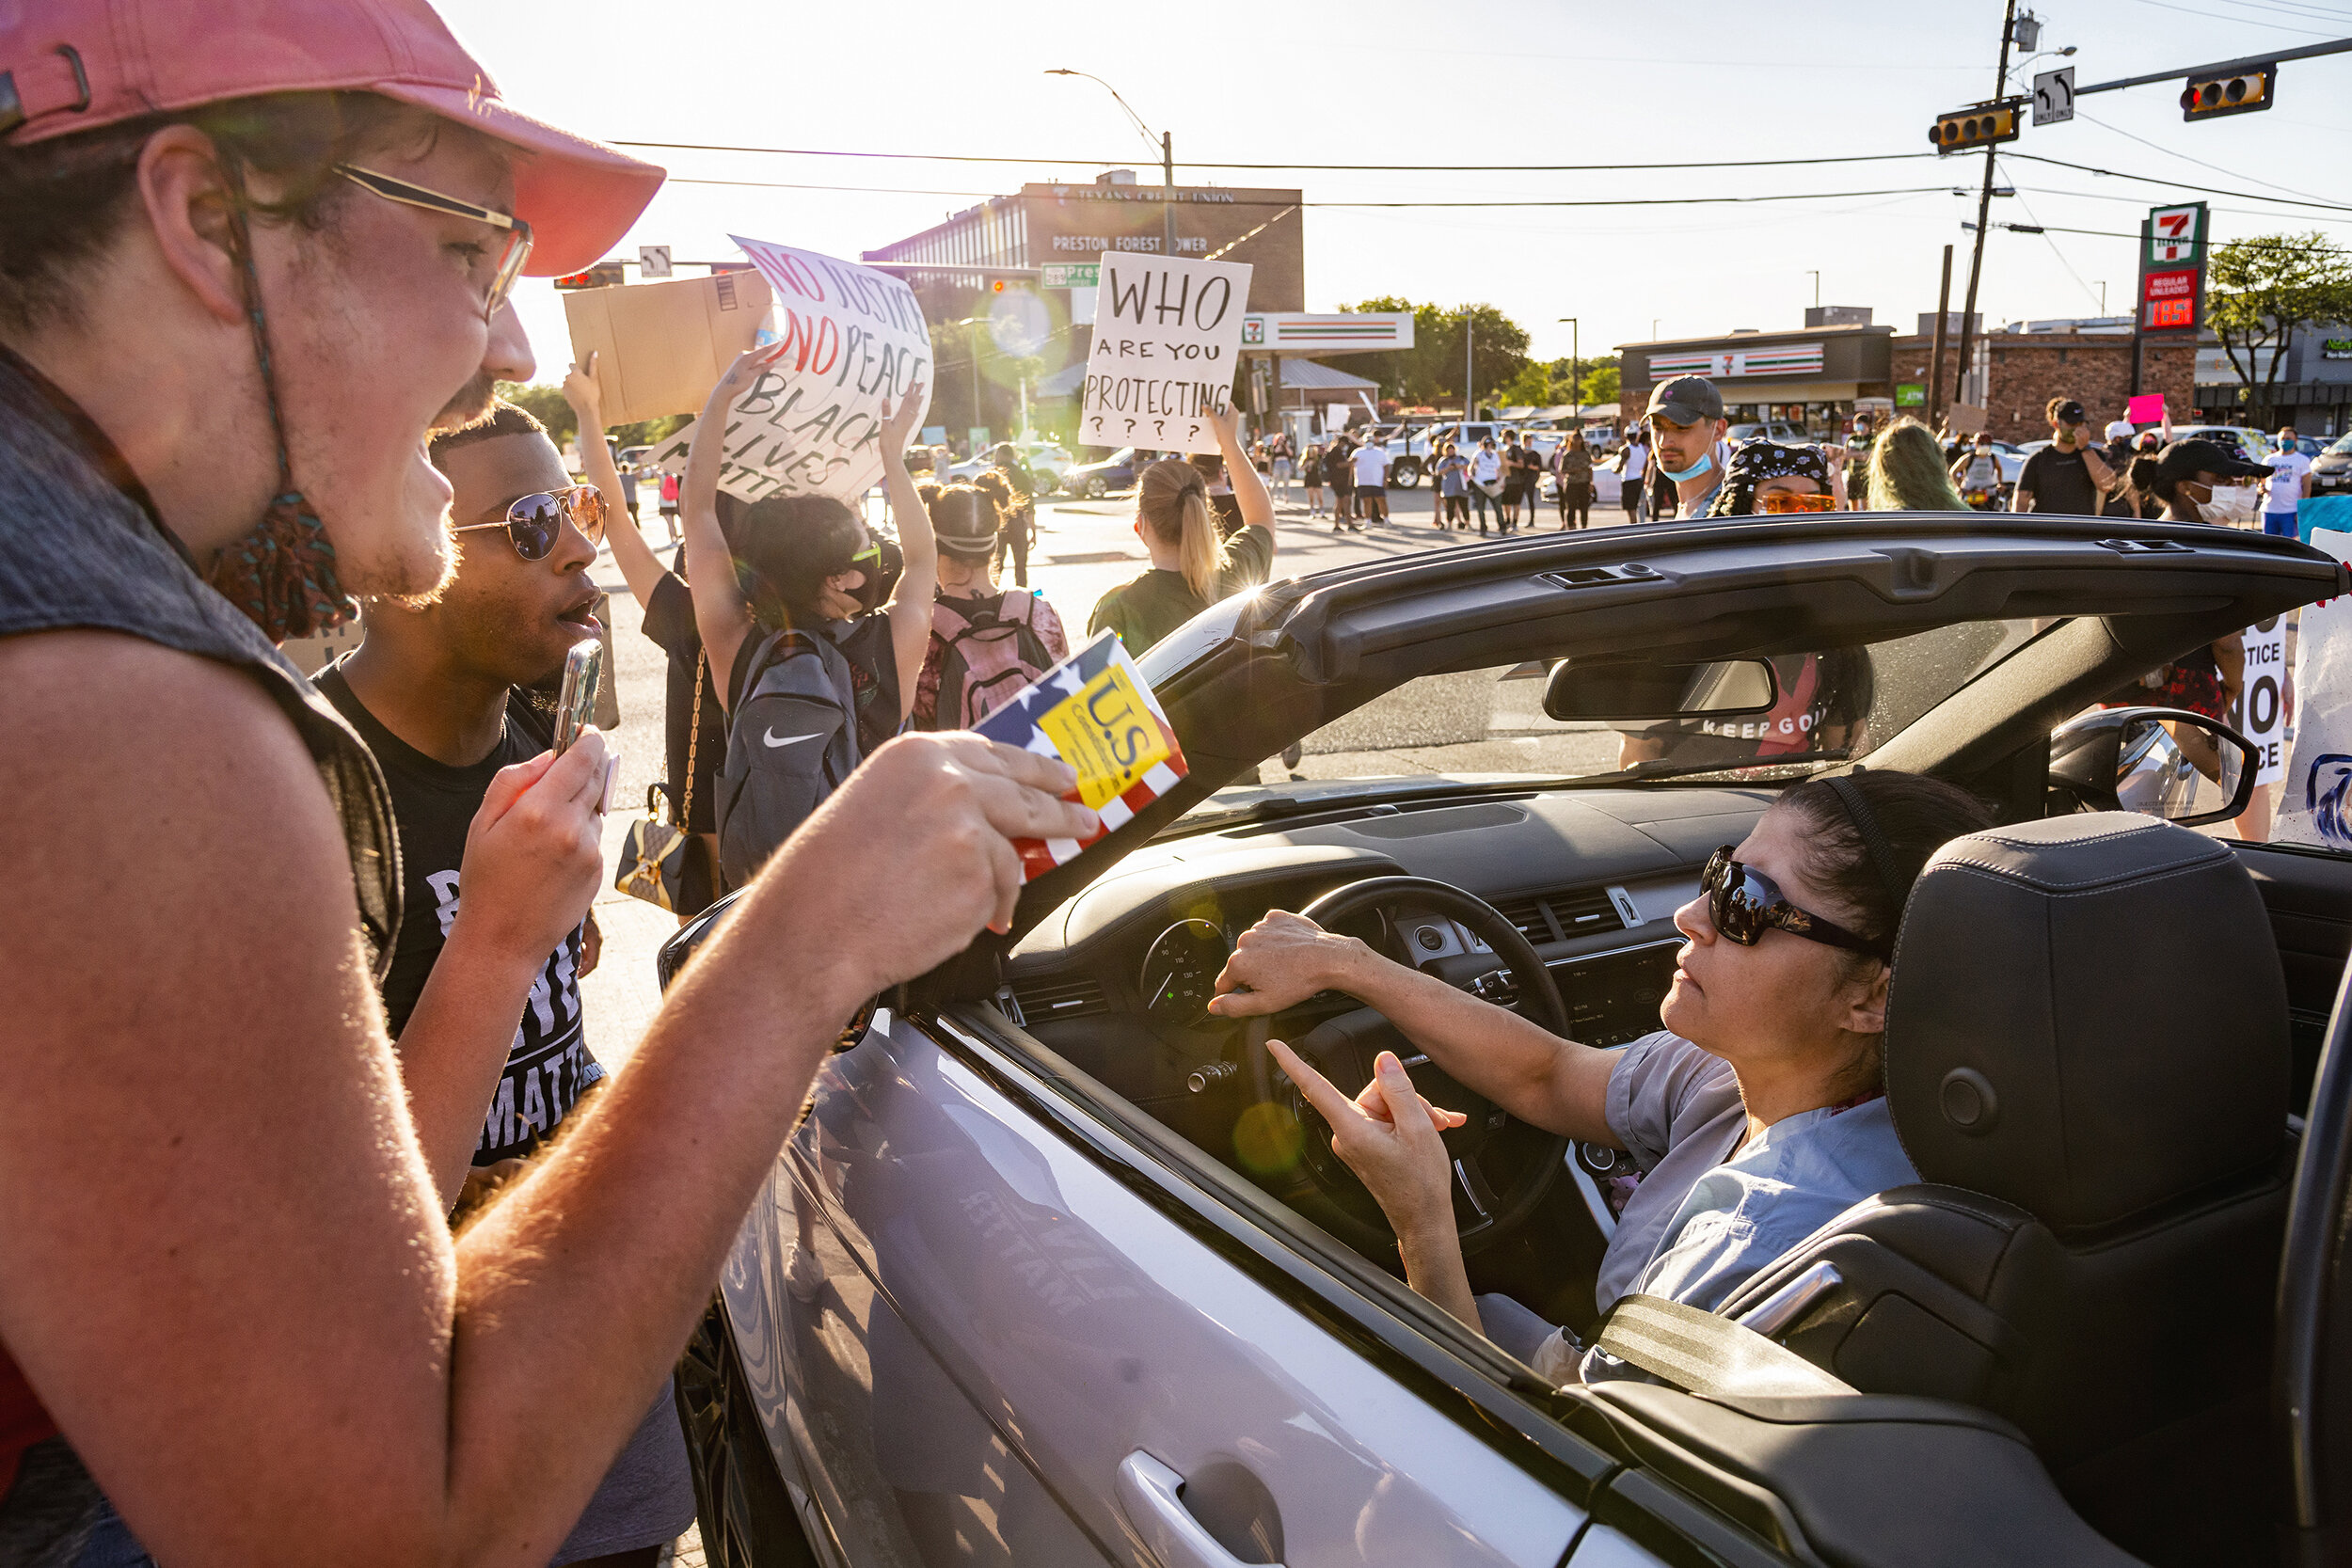  A protester holding the U.S. Constitution trades words with a motorist at Forest Lane and Preston Road in the Preston Hollow neighborhood of Dallas, TX on June 11, 2020.  Protesters shut down the busy intersection in an act of civil disobedience aim